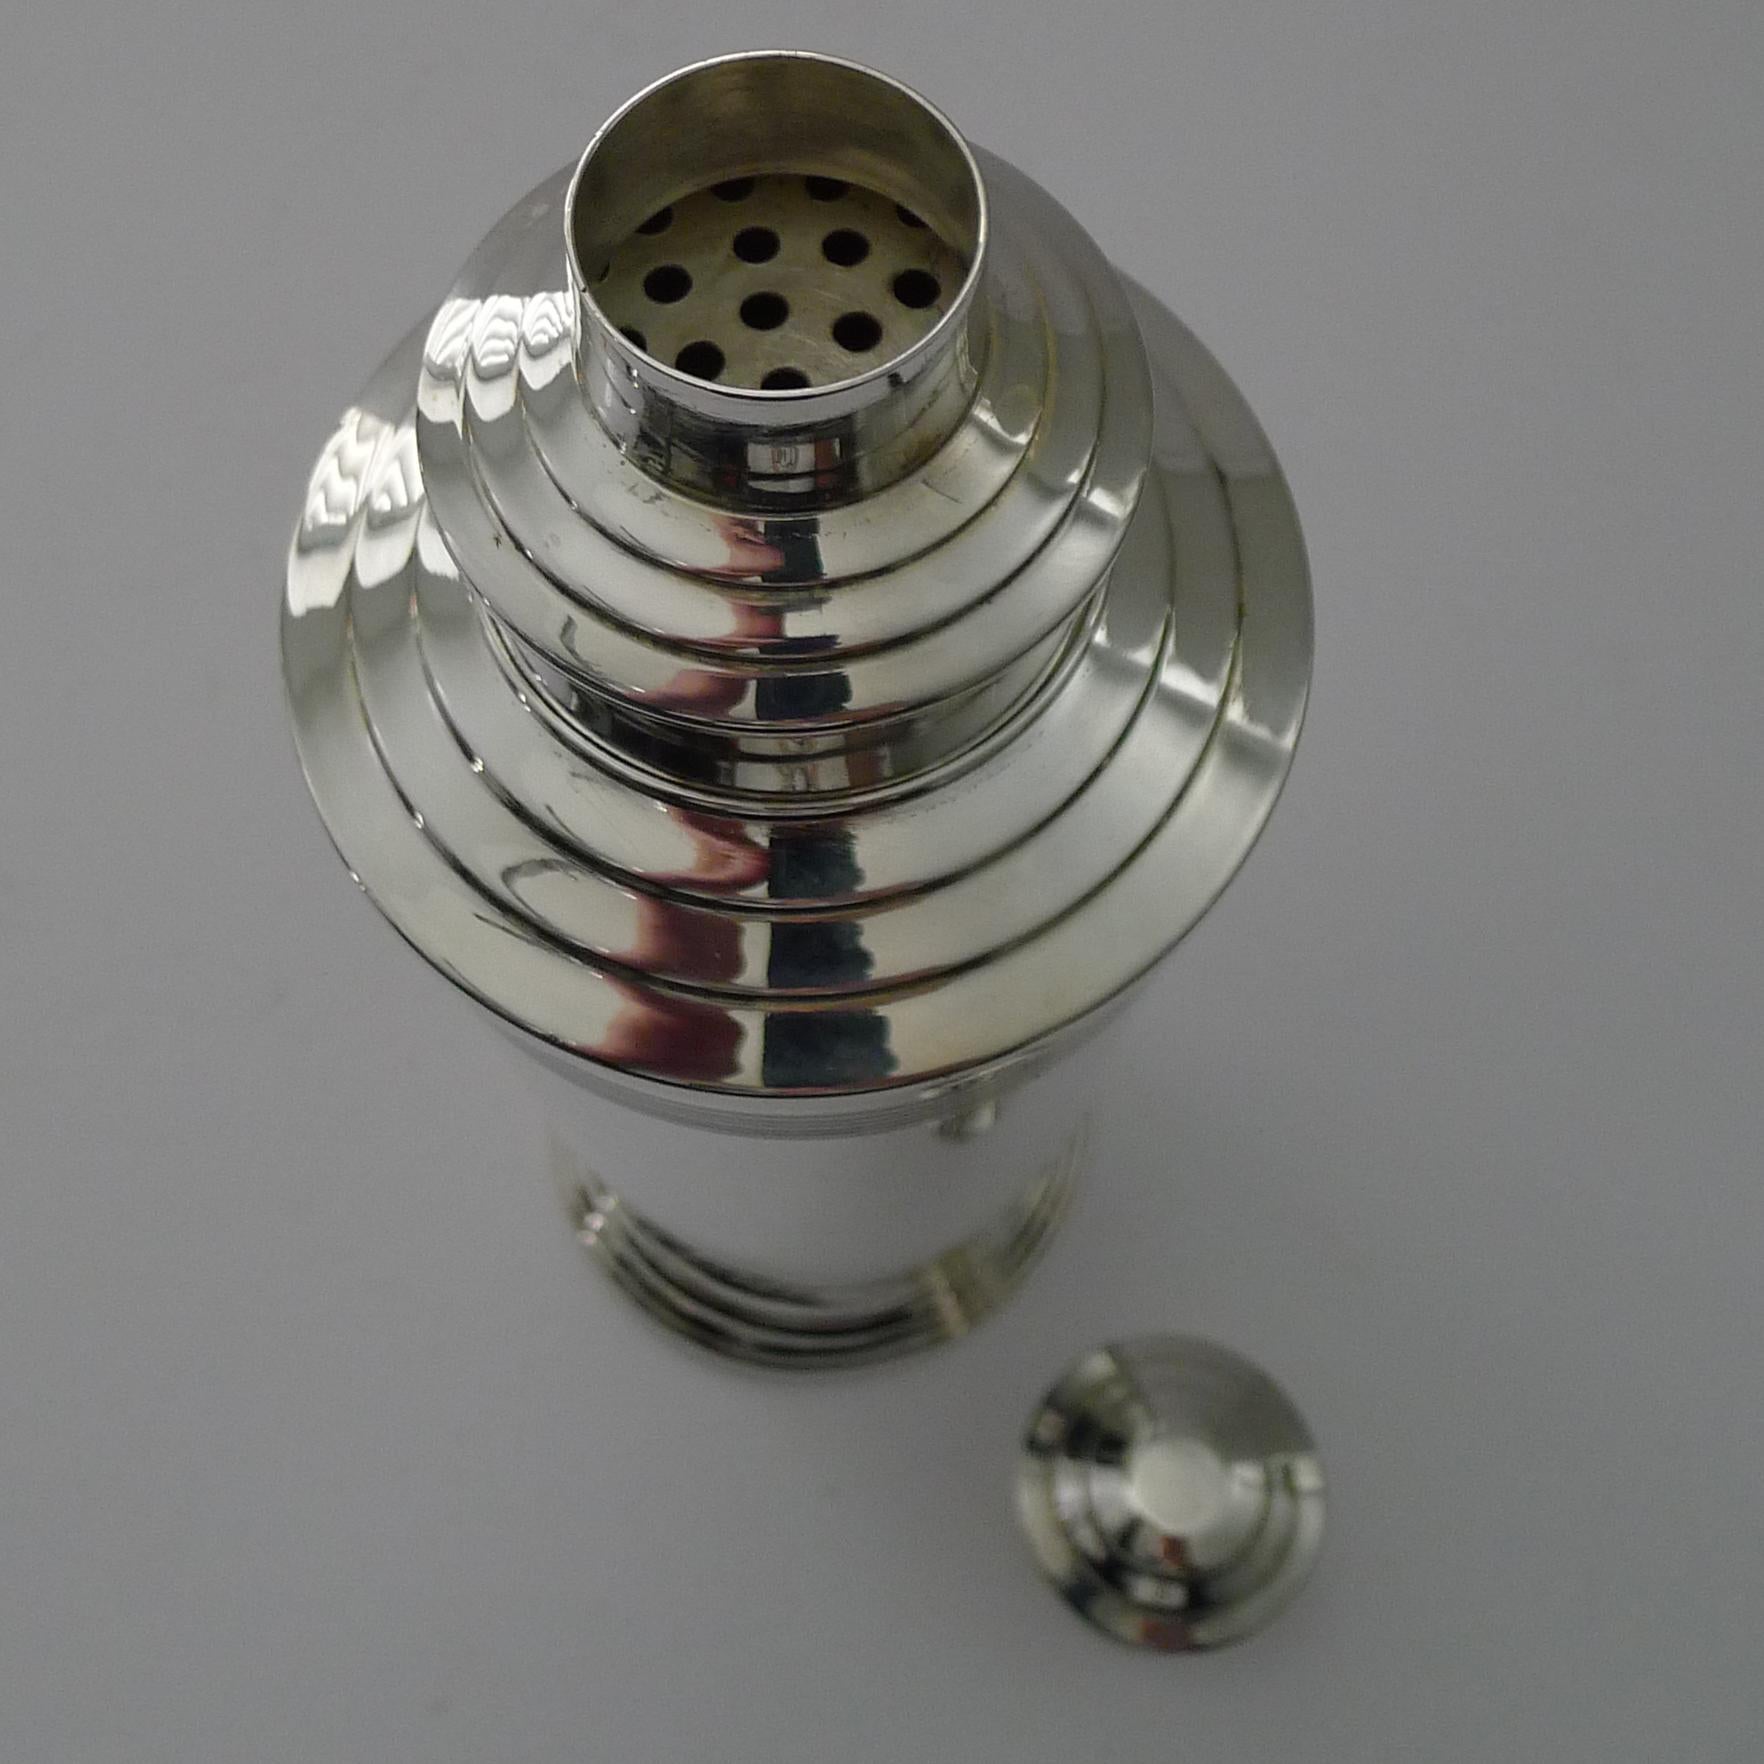 Mid-20th Century Iconic English Art Deco Cocktail Shaker by Barker Brothers For Sale